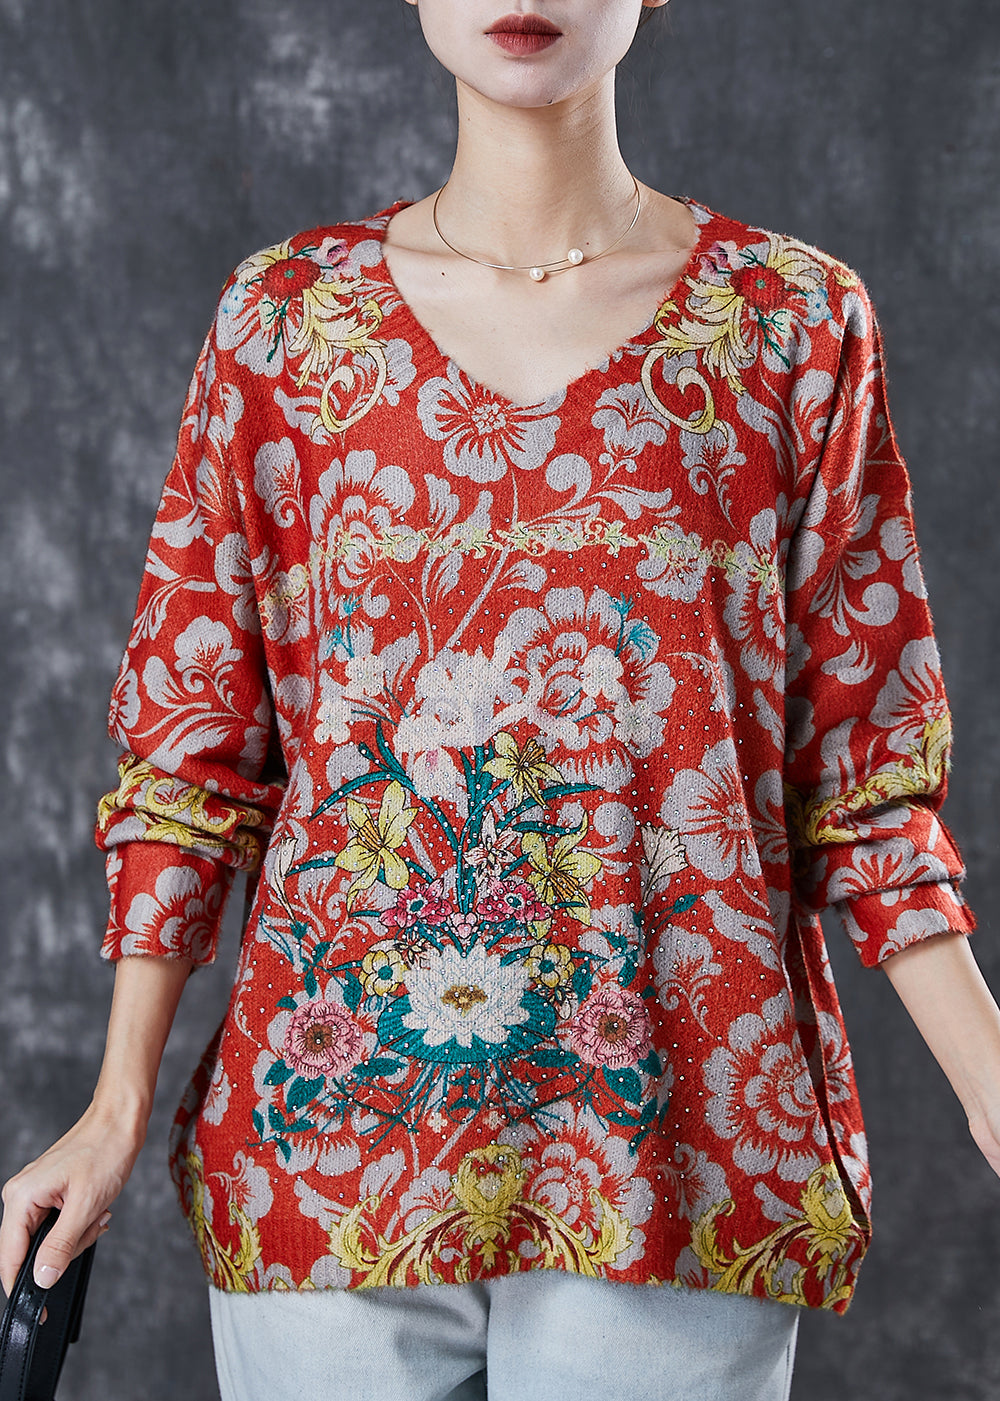 Women Red Oversized Floral Zircon Knit Sweater Spring